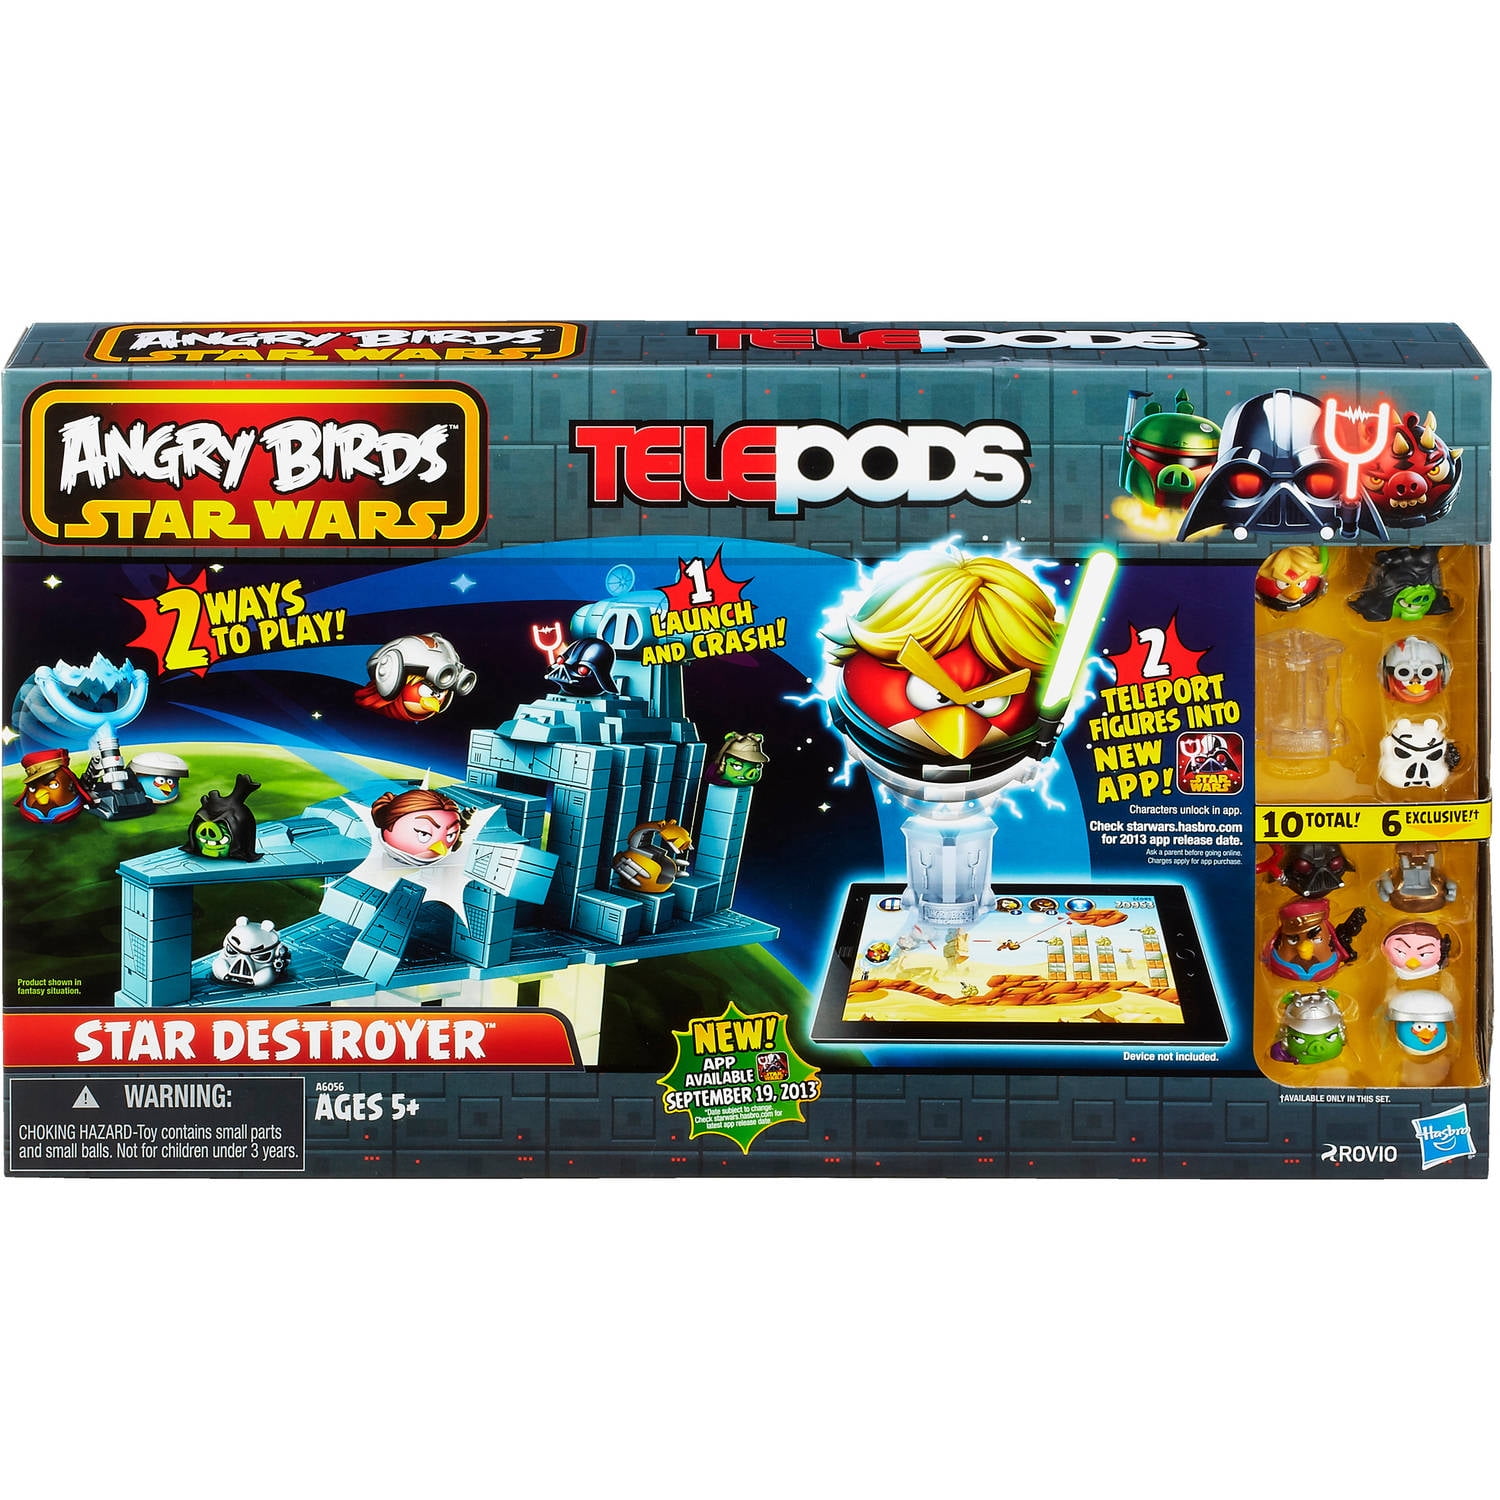 Hasbro Star Wars Angry Birds Action Figure for sale online